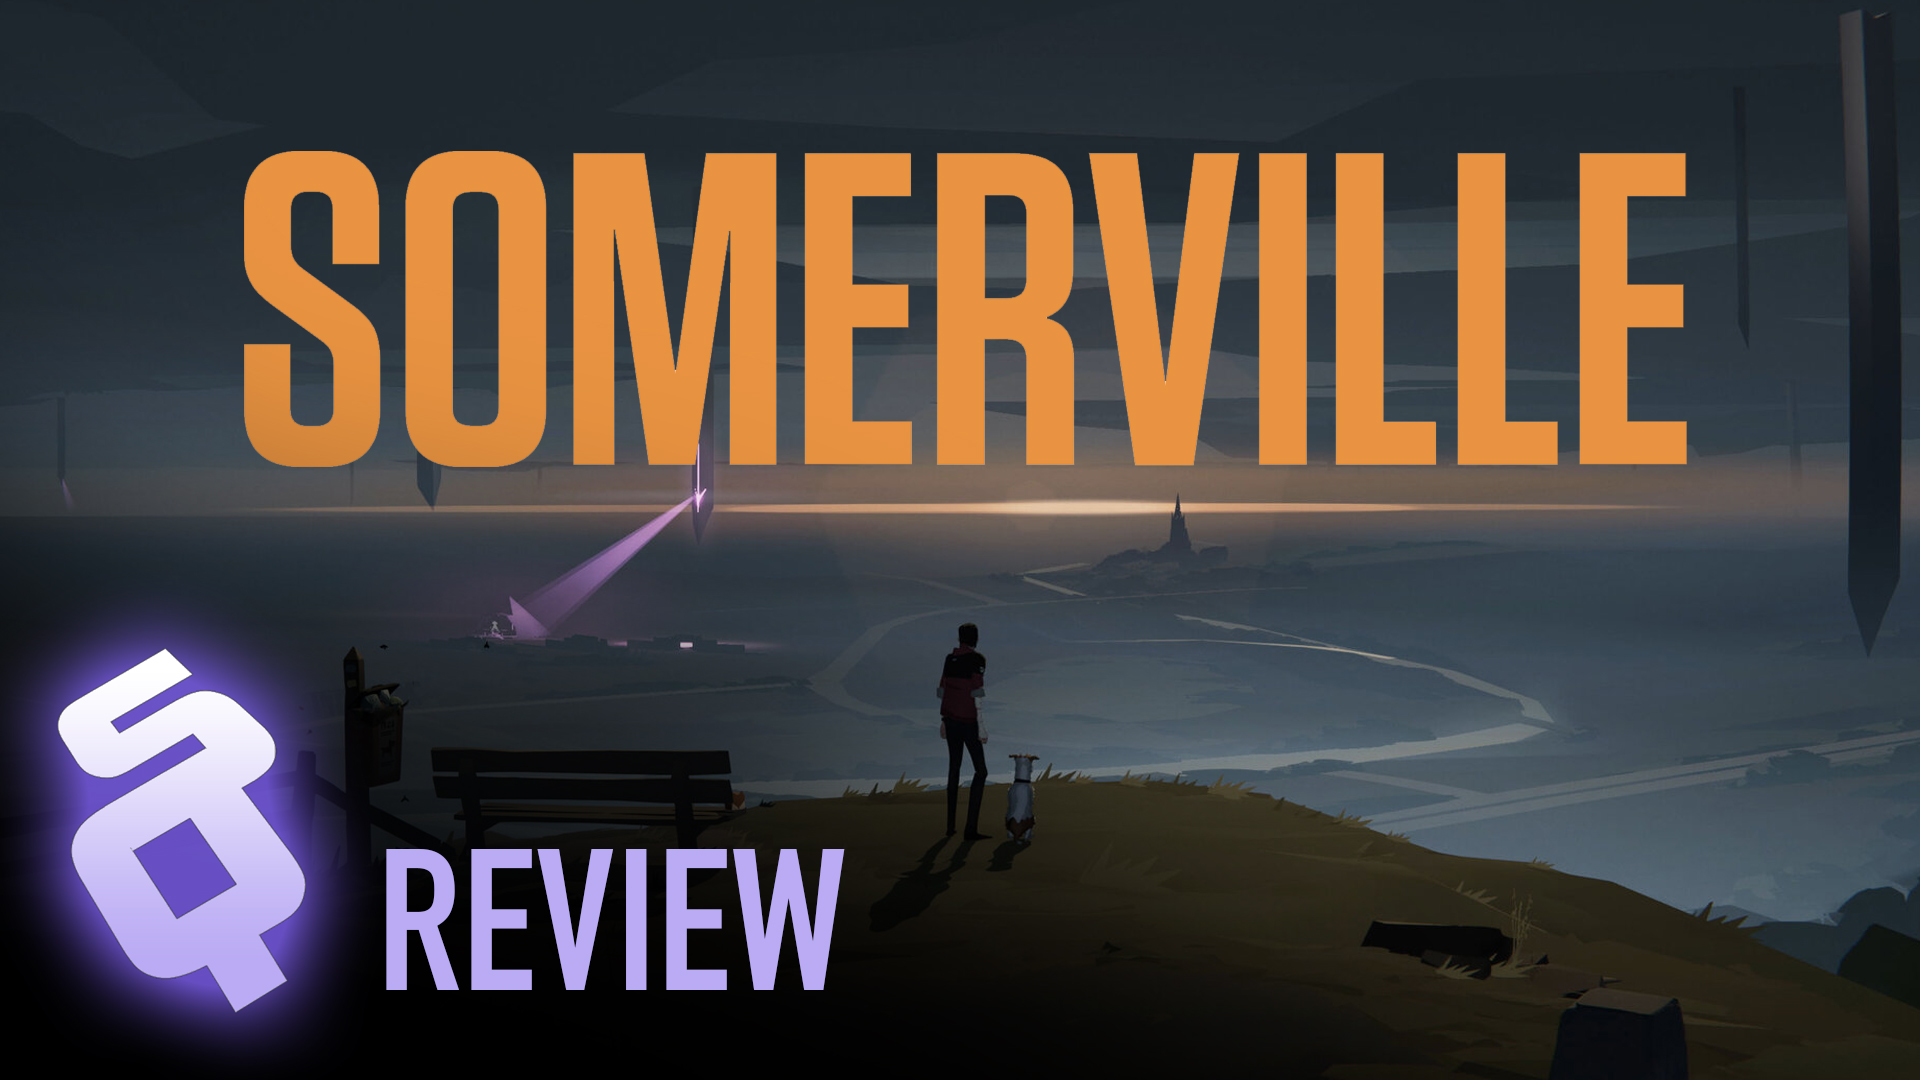 Somerville review